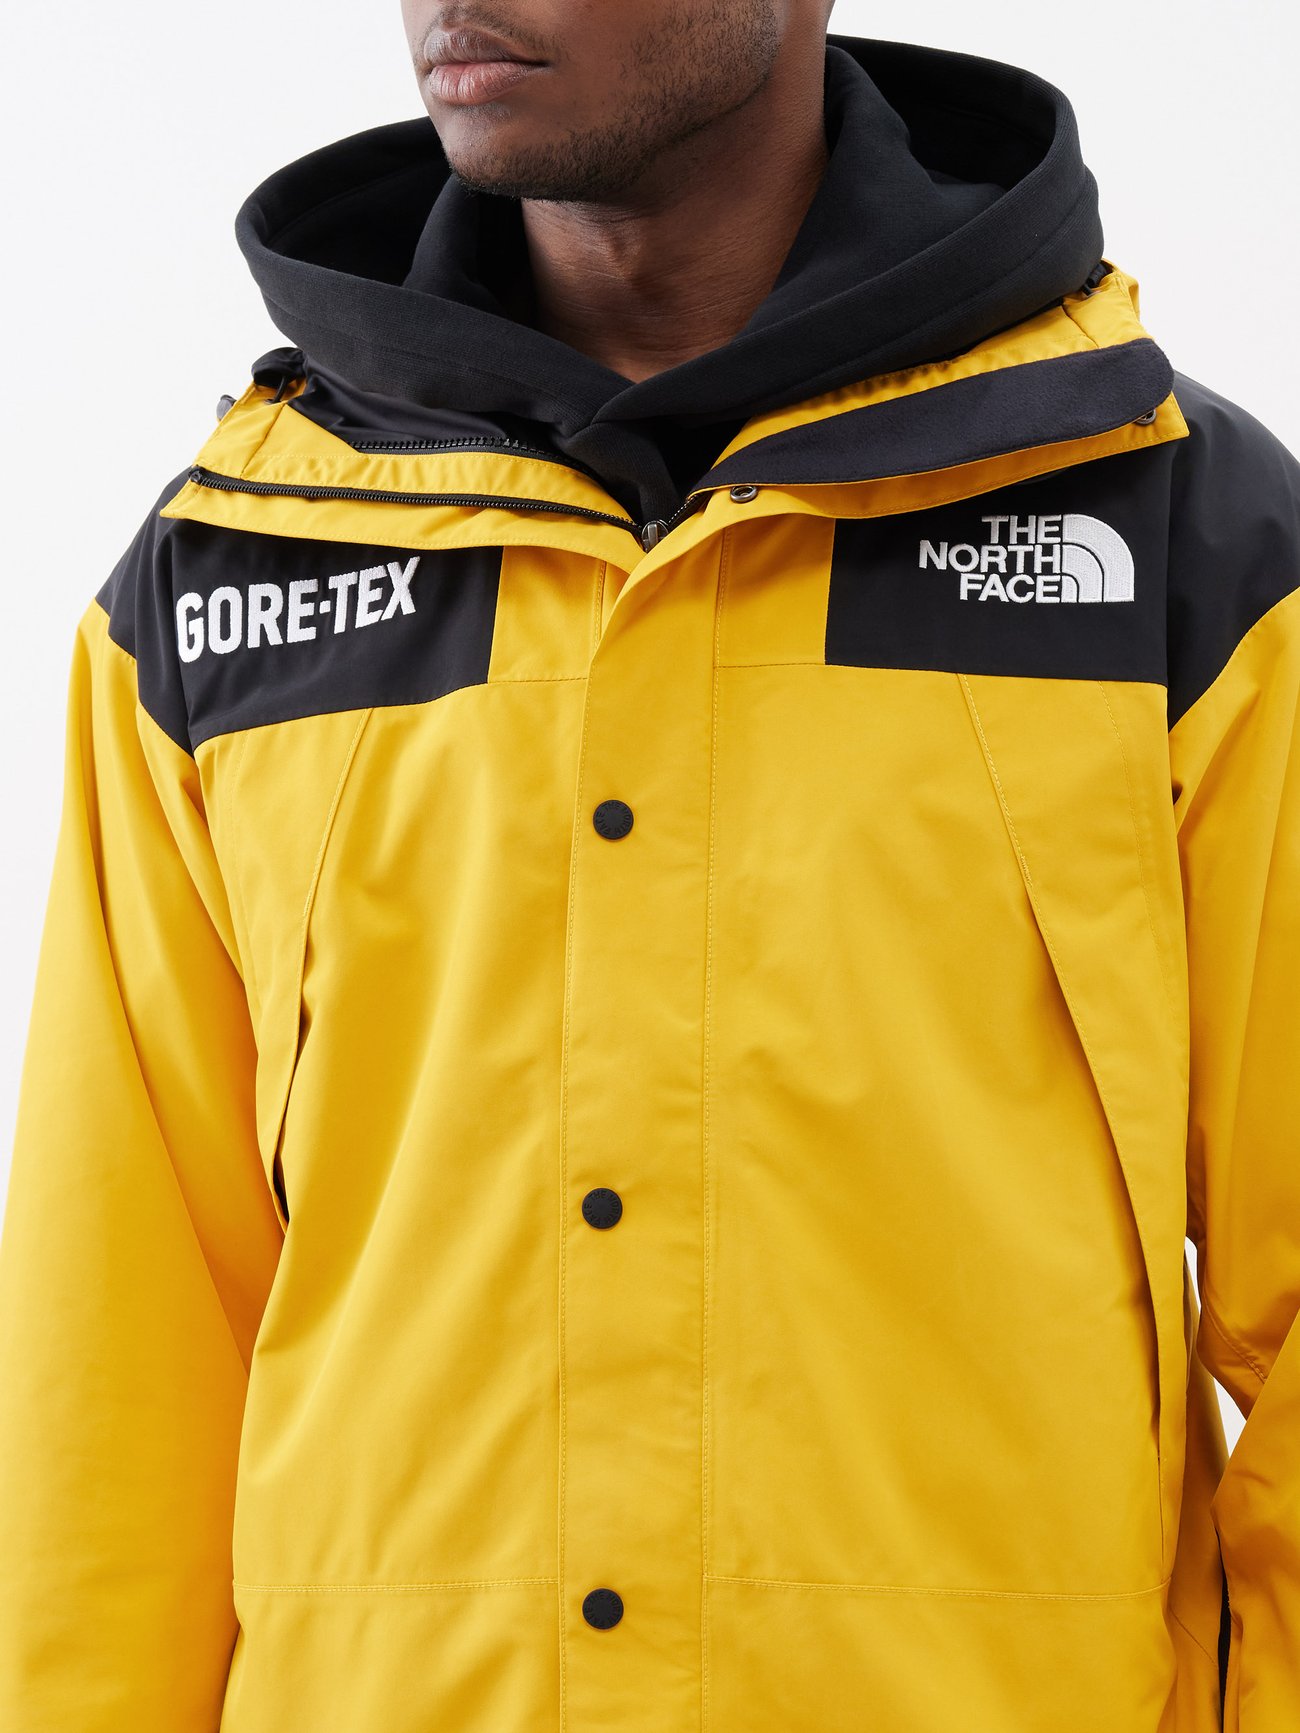 The North Face S GTX Mountain Guide Insulated Jacket in Yellow - Size L